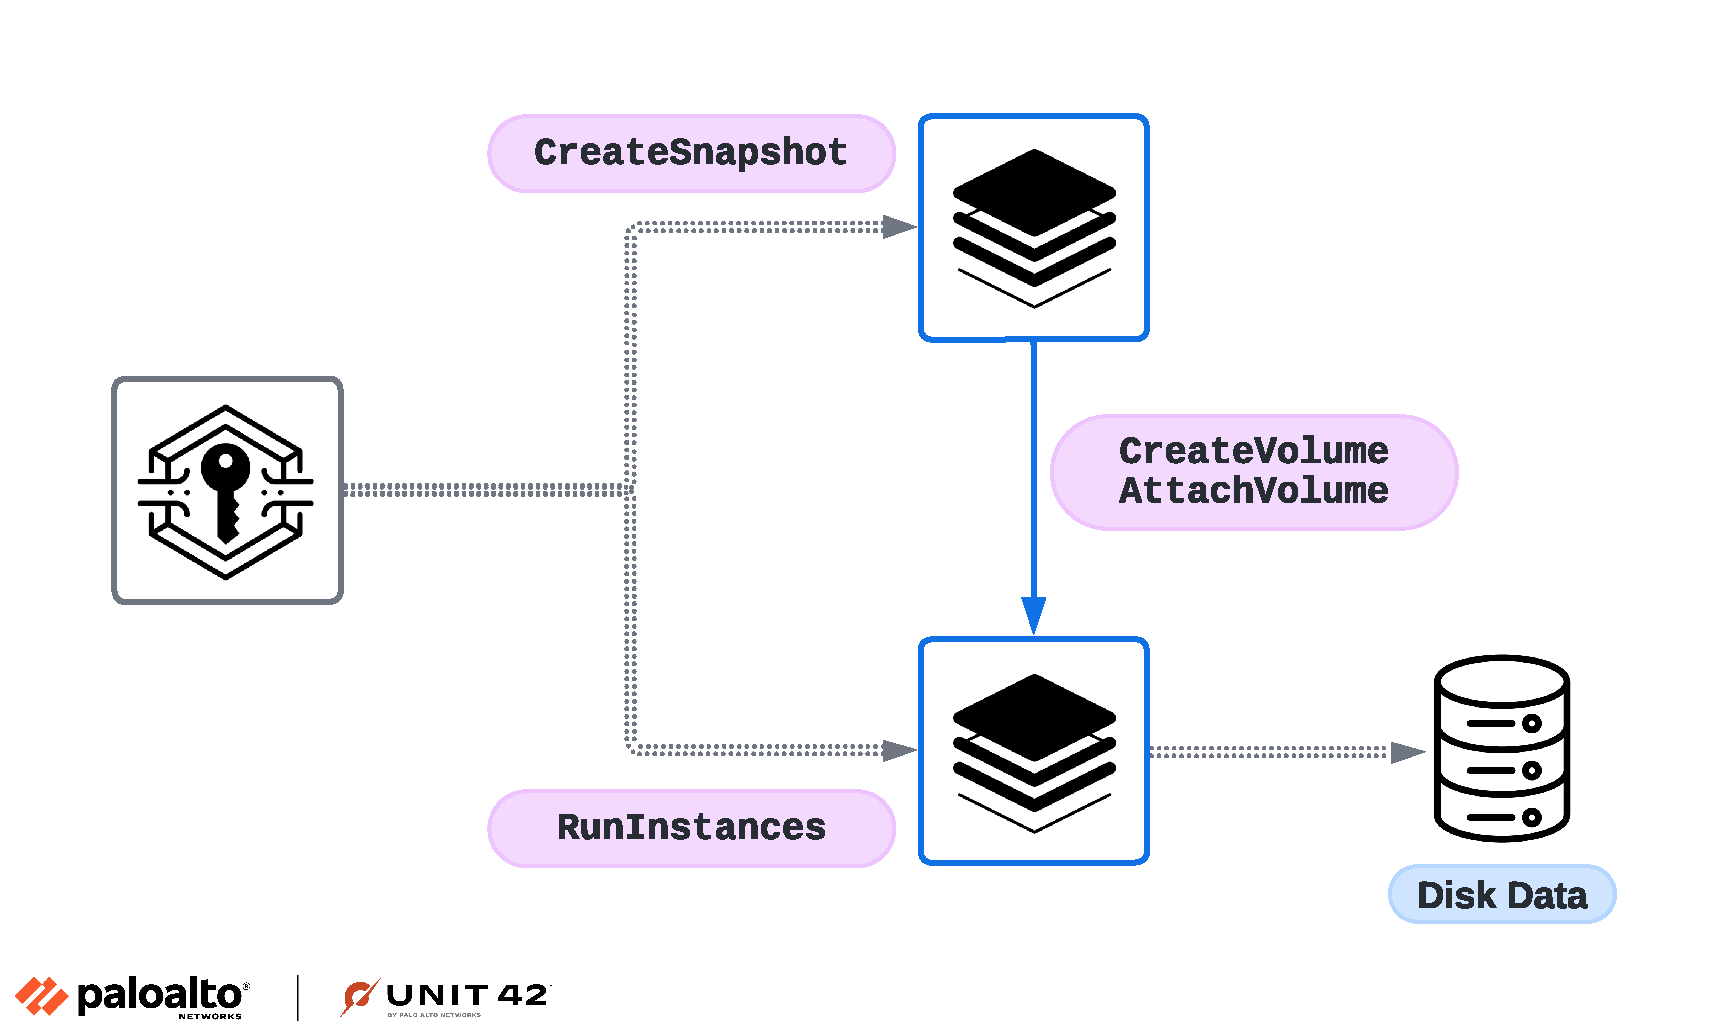 Image 2 is a tree diagram of the RBS snapshot mounted to an attacker-controlled instance. From the credentials two branches indicate CreateSnapshot and RunInstances are used. The top server hits the bottom with CreateVolume and AttachVolume. This hits the disk data. 